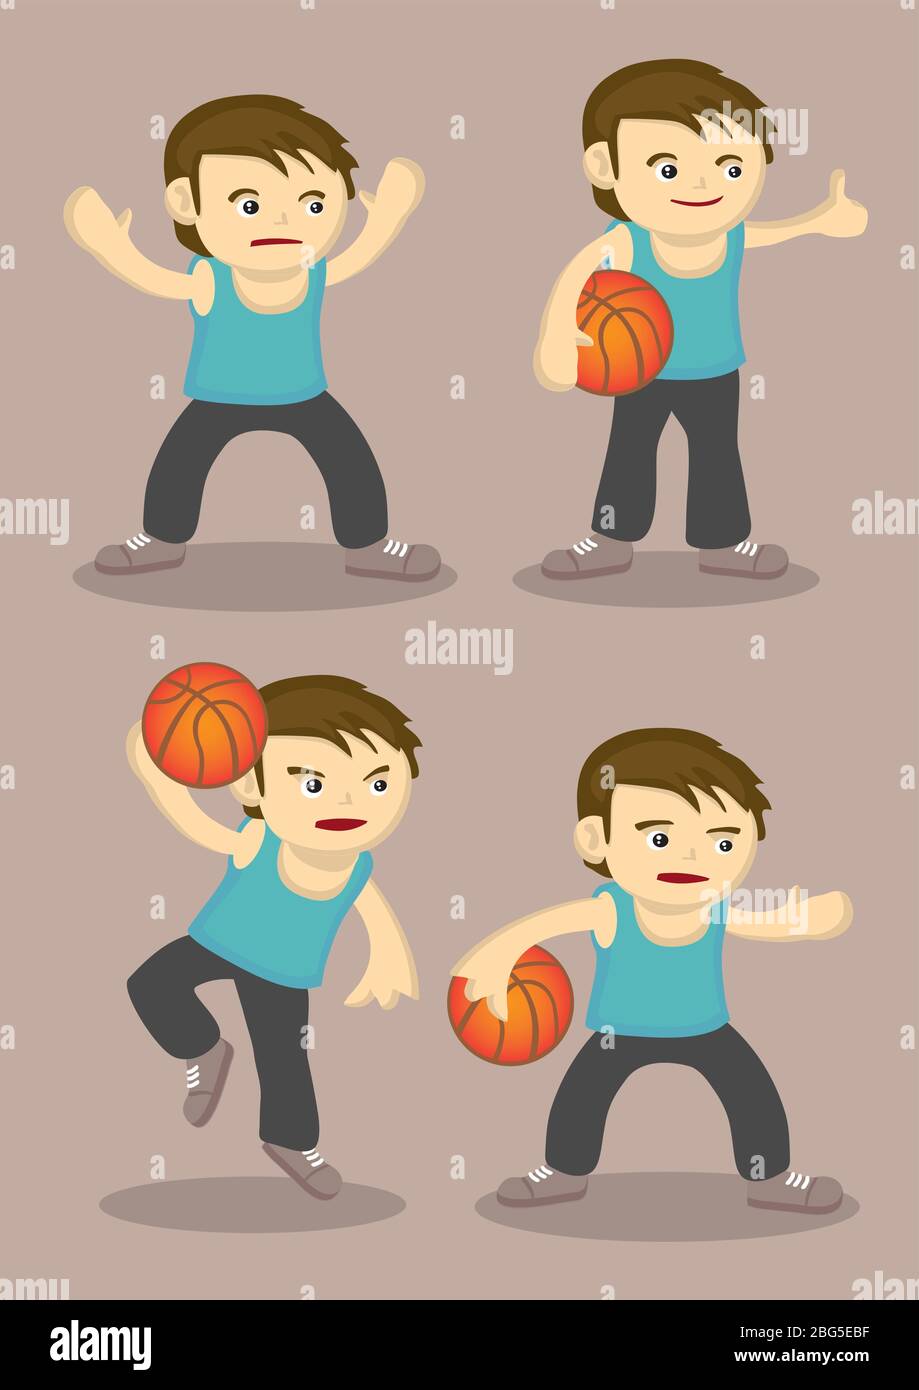 Vector cartoon of a young basketball player in four different poses Stock Vector